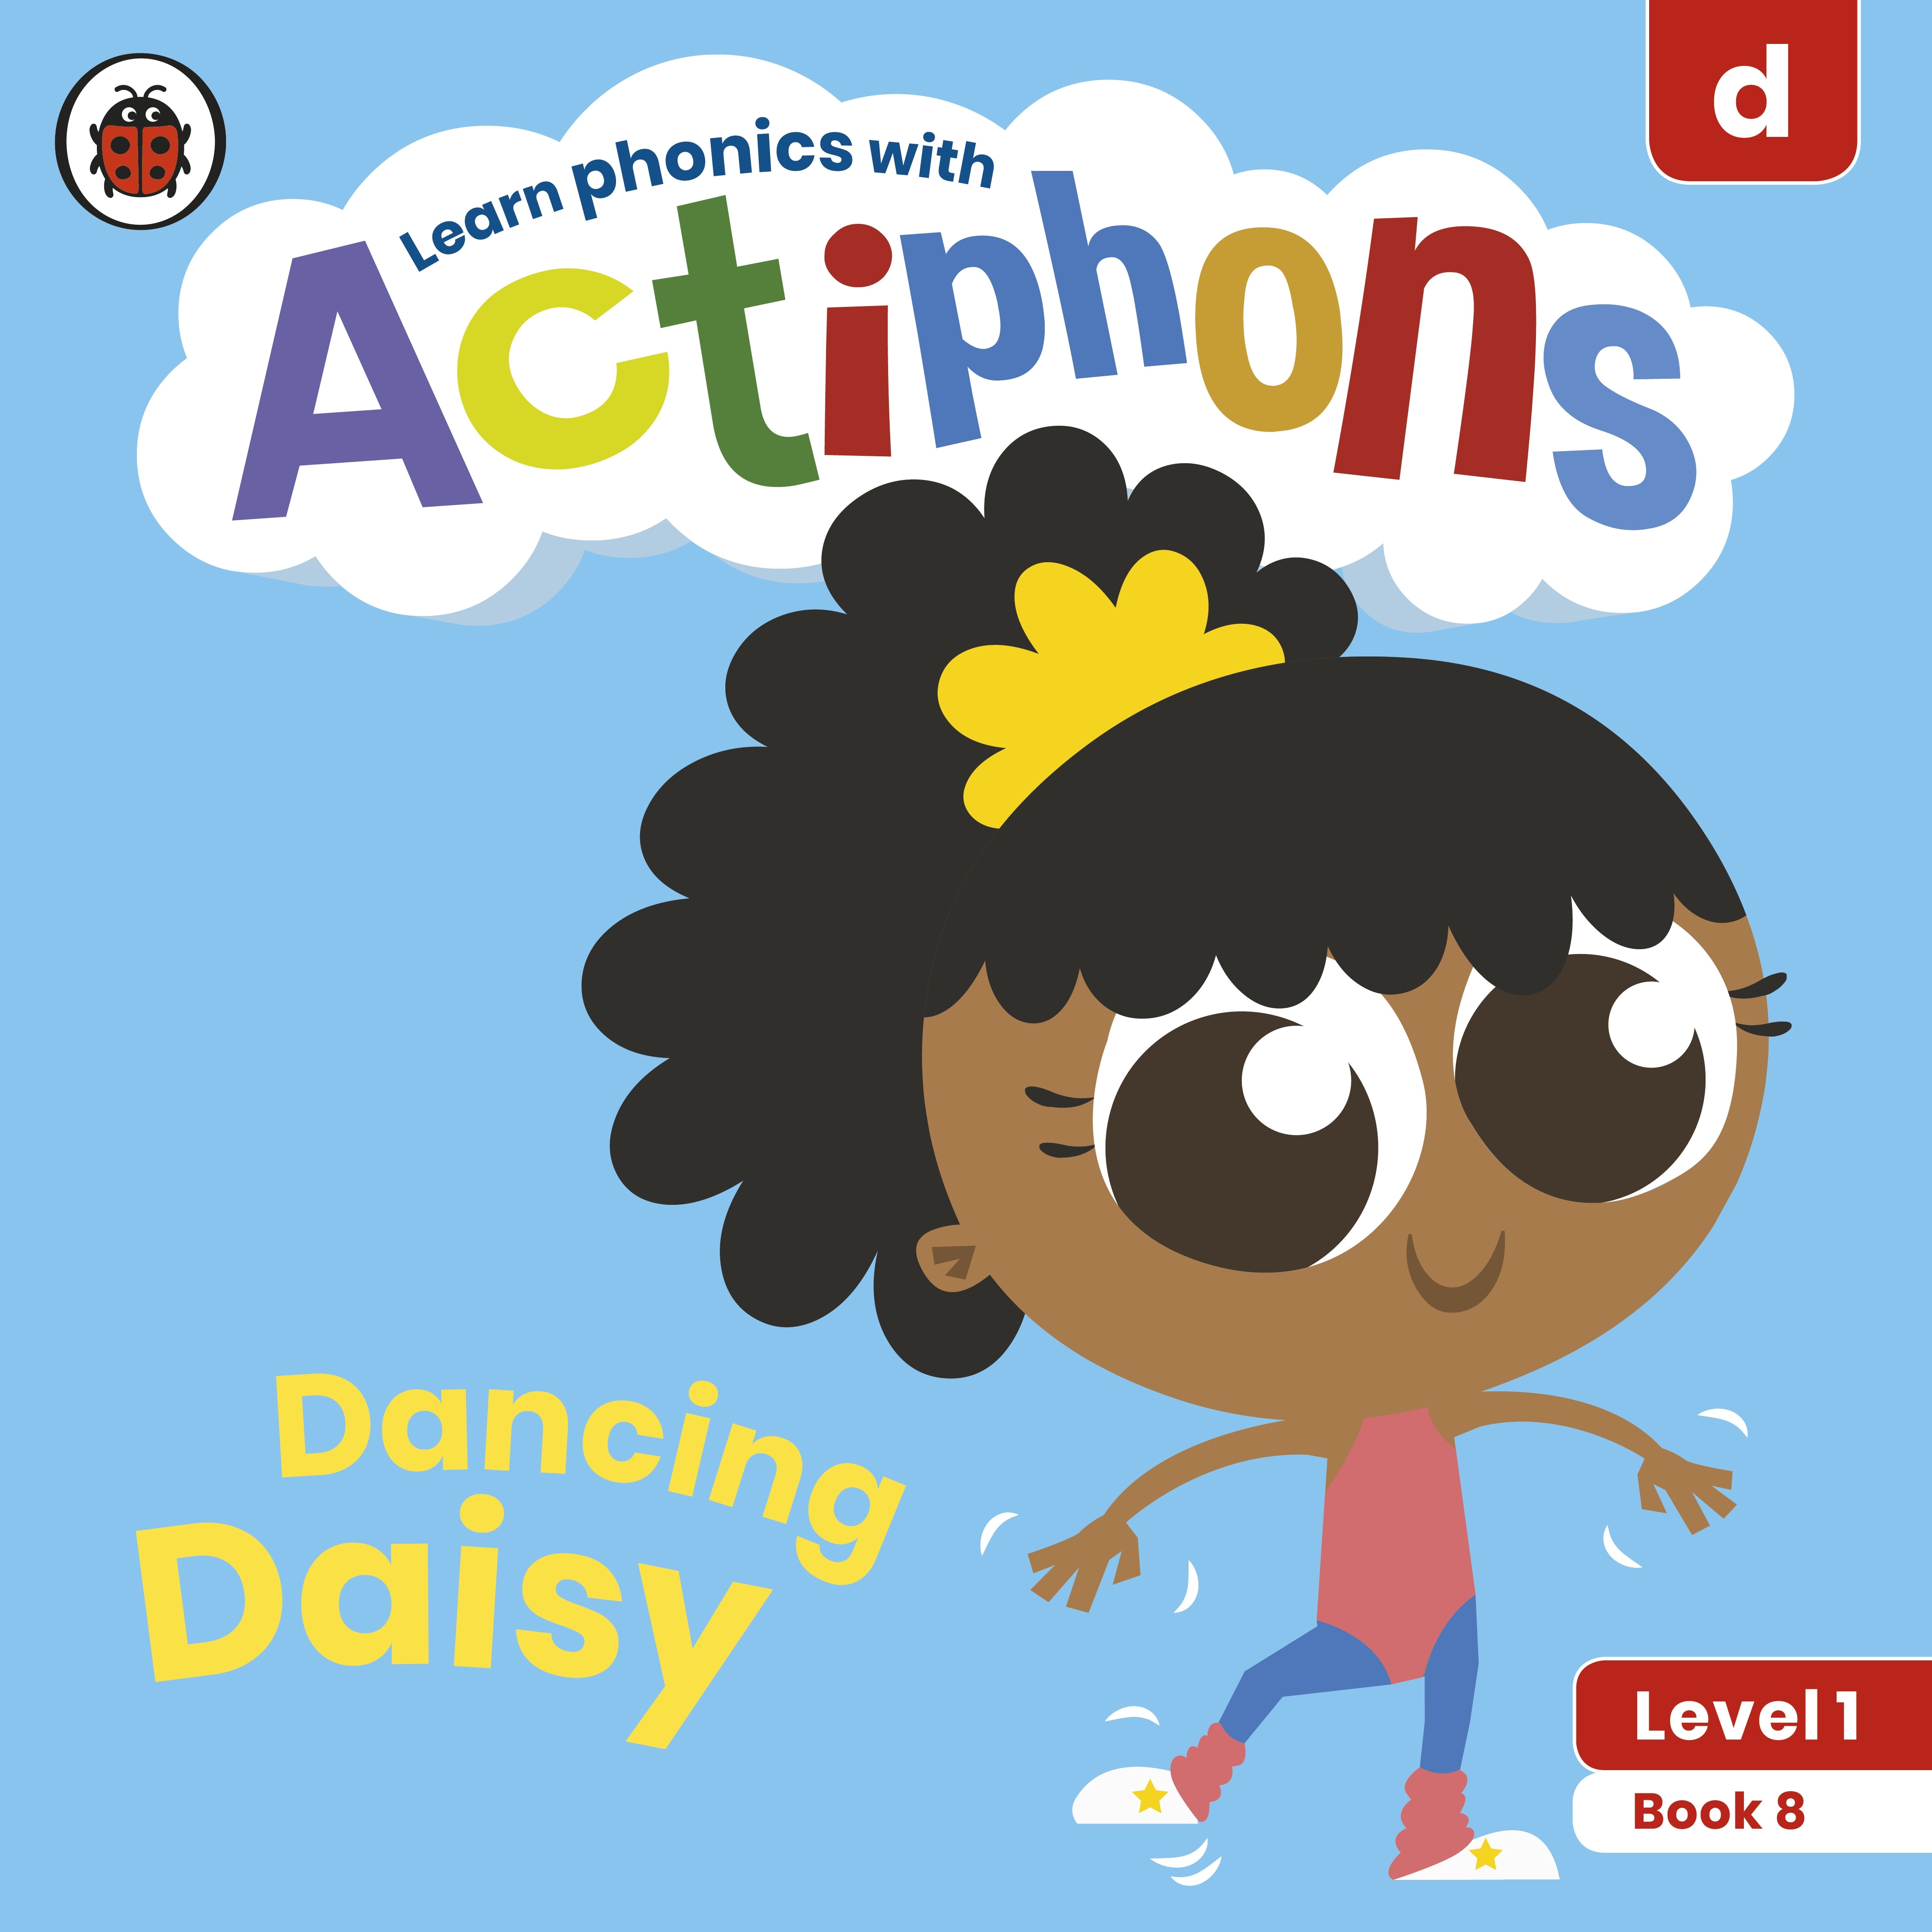 Actiphons Level 1 Book 8 Dancing Daisy